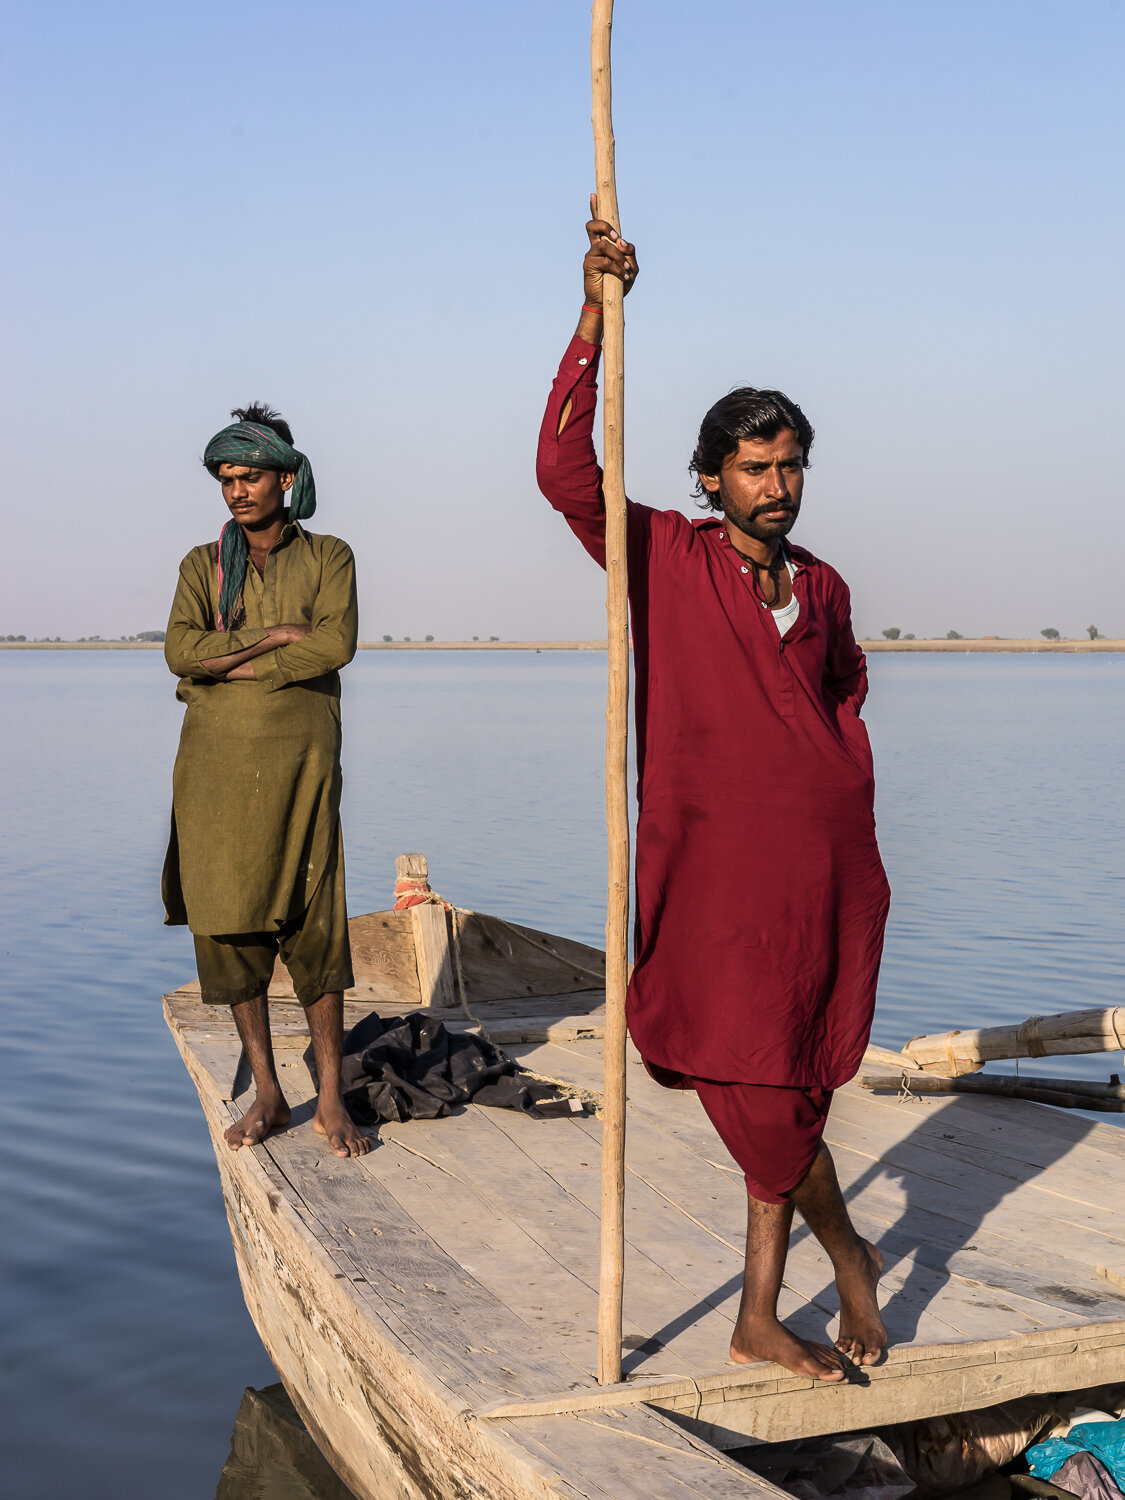  Boatmen on the Indus River on Monday, November 27, 2017 in Sehwan Sharif, Sindh, Pakistan. The Indus and its tributaries form the backbone of Pakistan's fresh water supply, and a series of river-fed canals irrigate the fields that support much of th